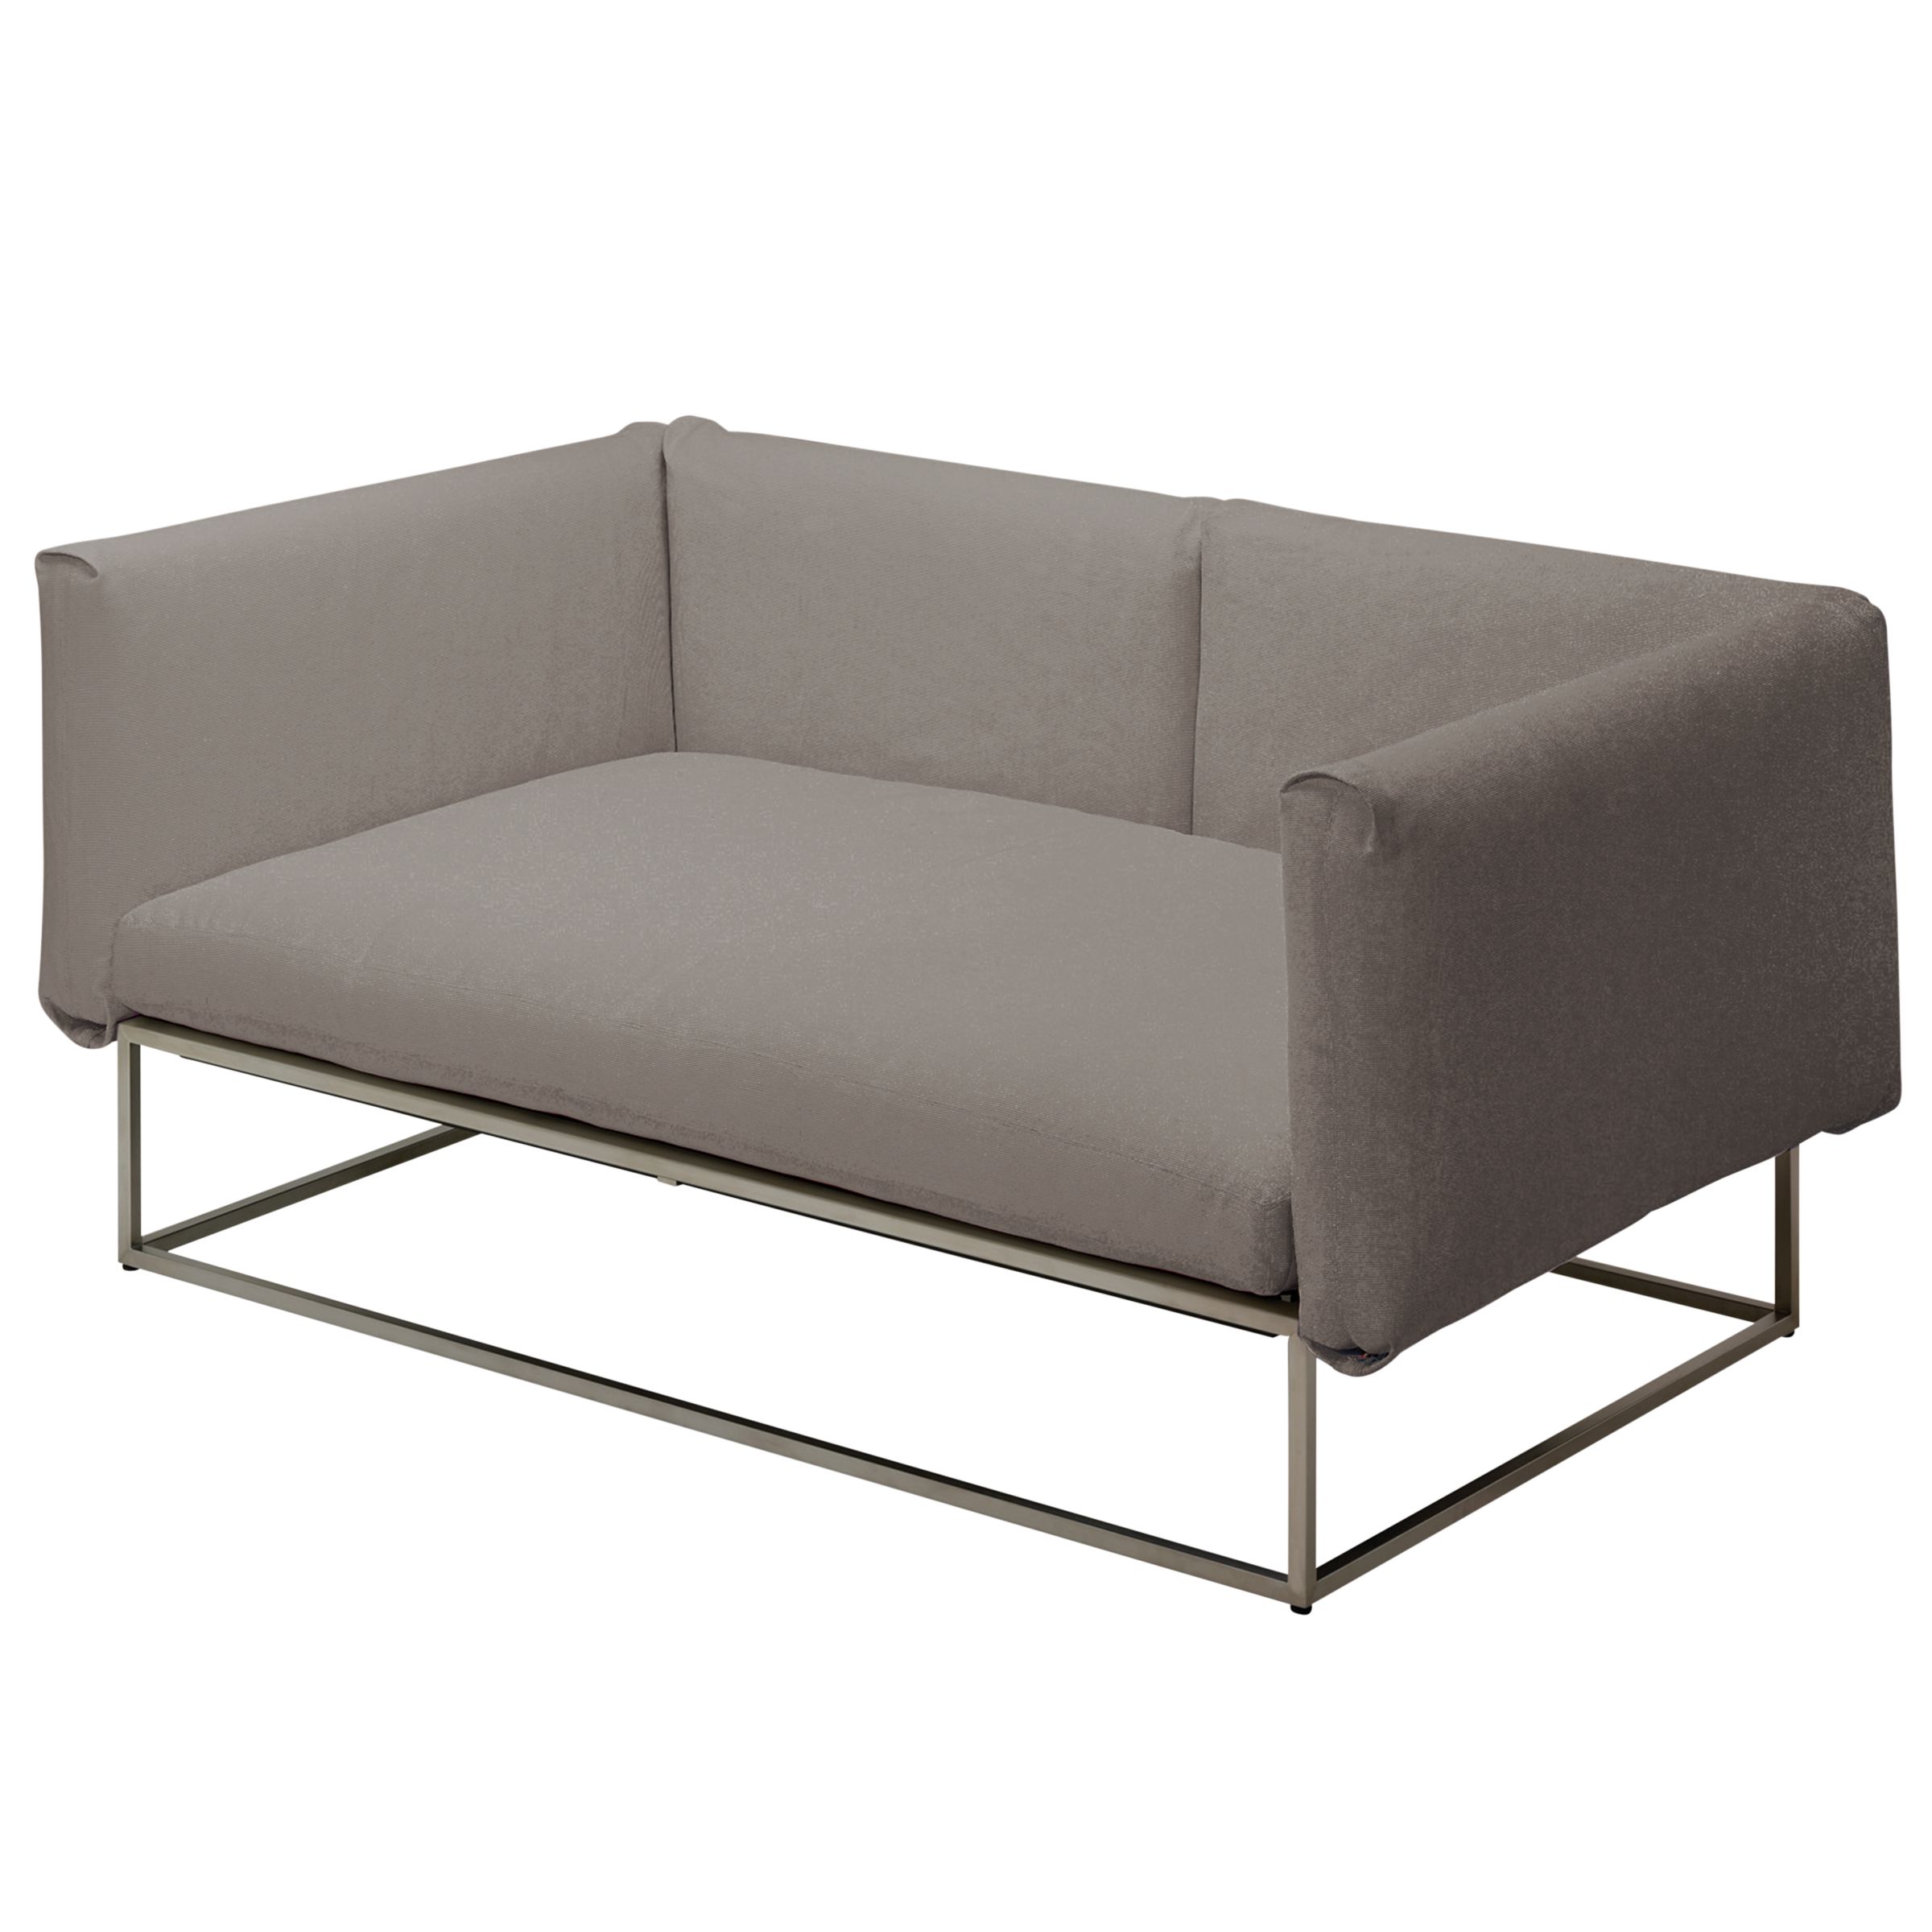 Gloster Cloud Outdoor Sofa with Arms, Taupe, width 178cm